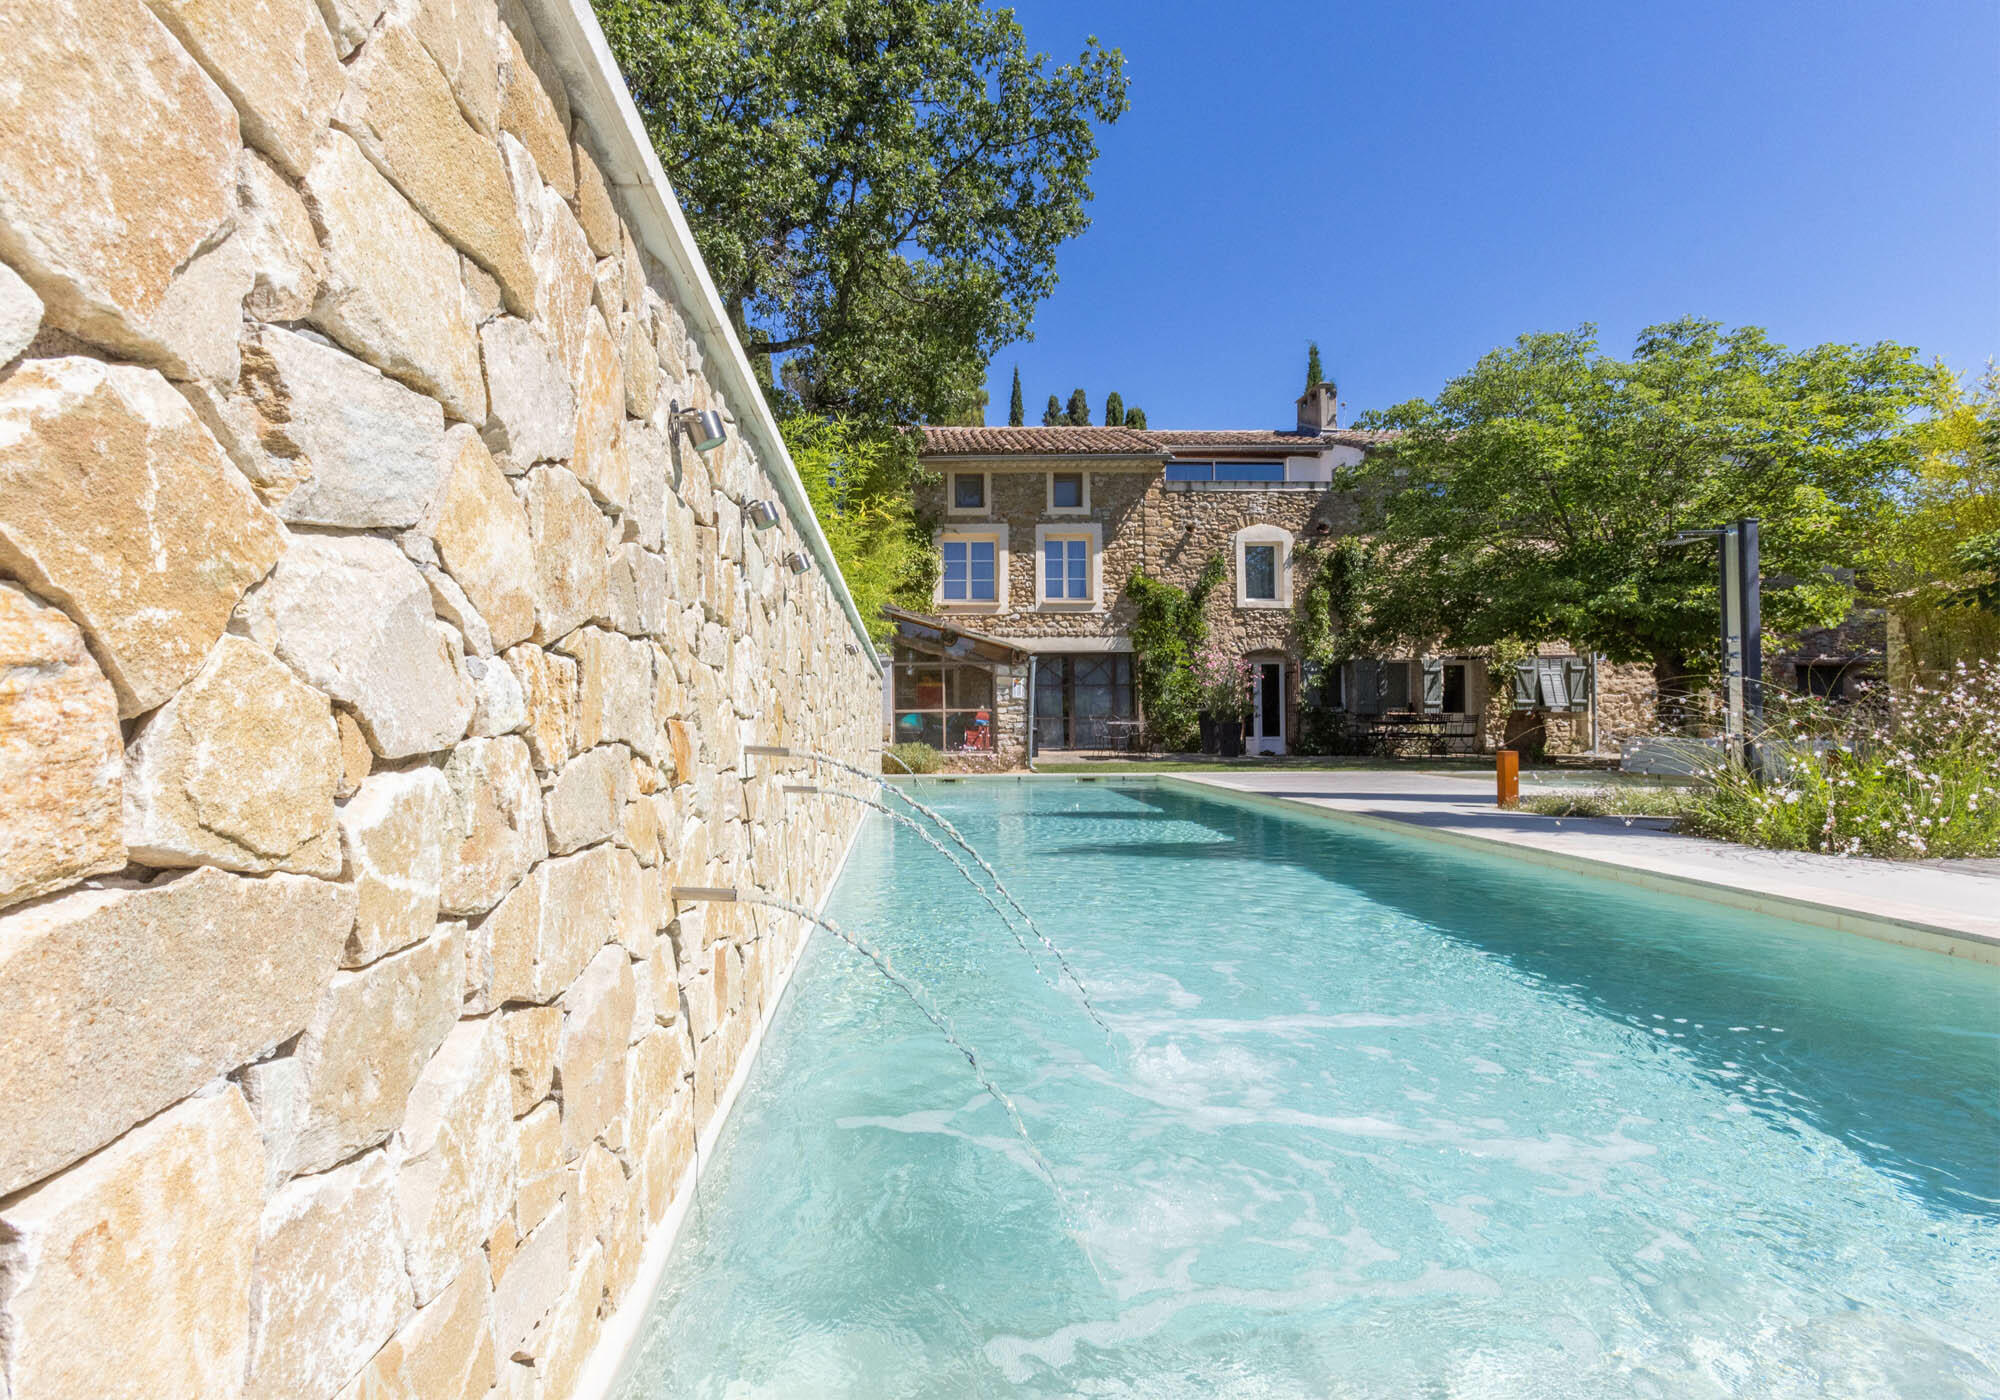 For quiet holidays under the Provence sun